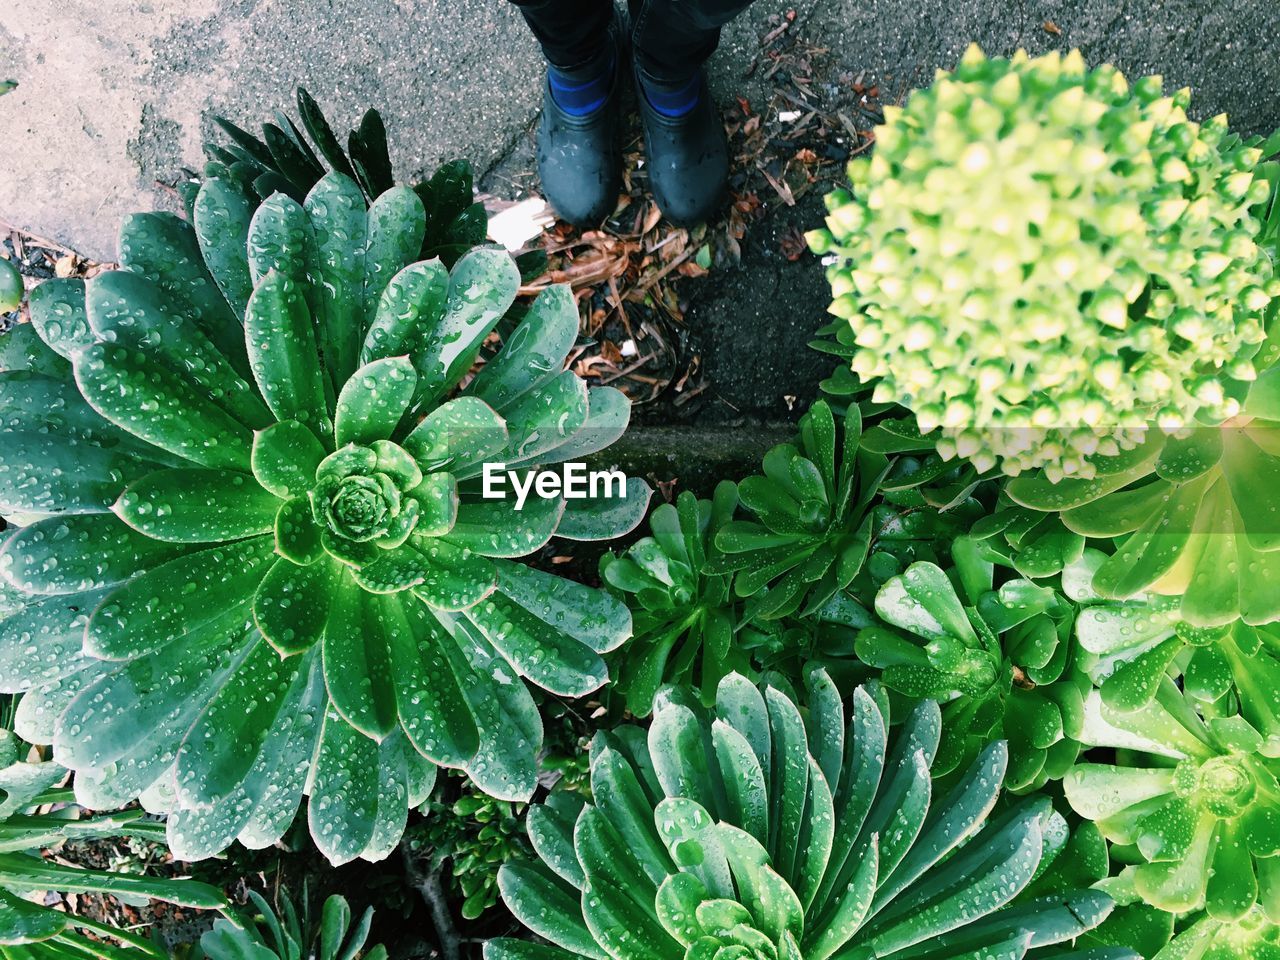 Person standing in front of wet succulent plants